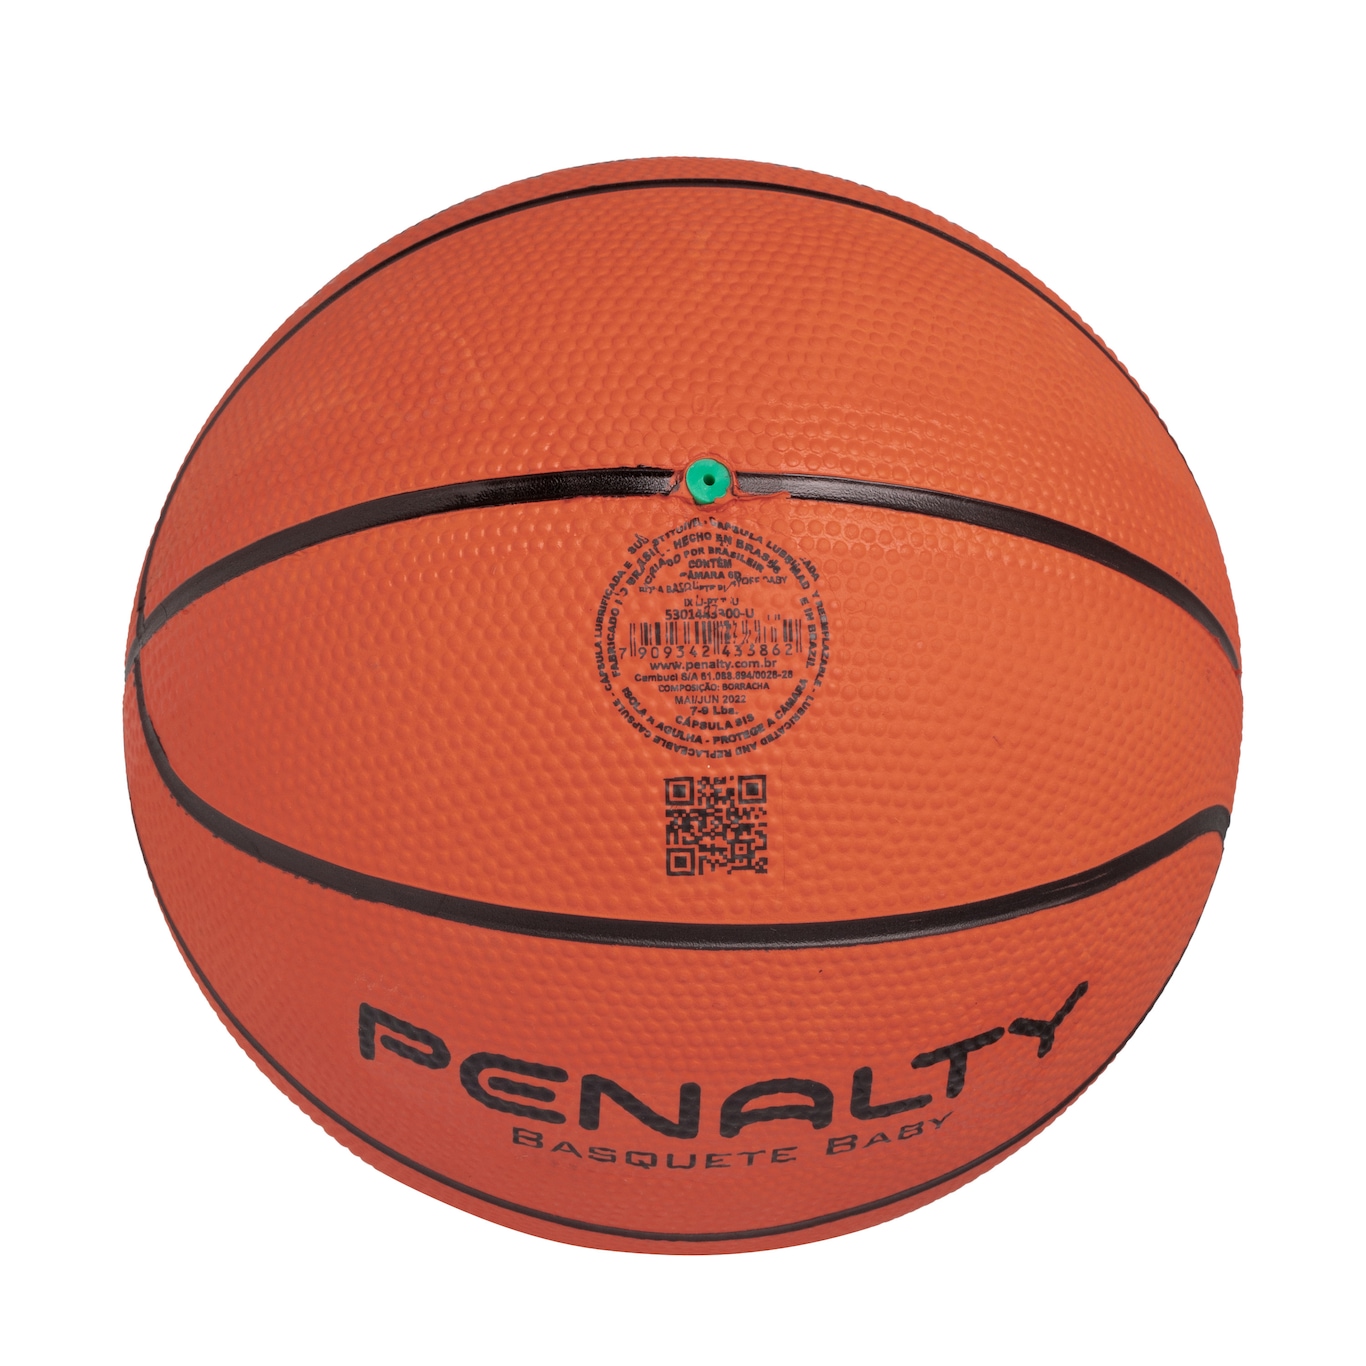 Bola Basquete Penalty Playoff Baby ix - Penalty